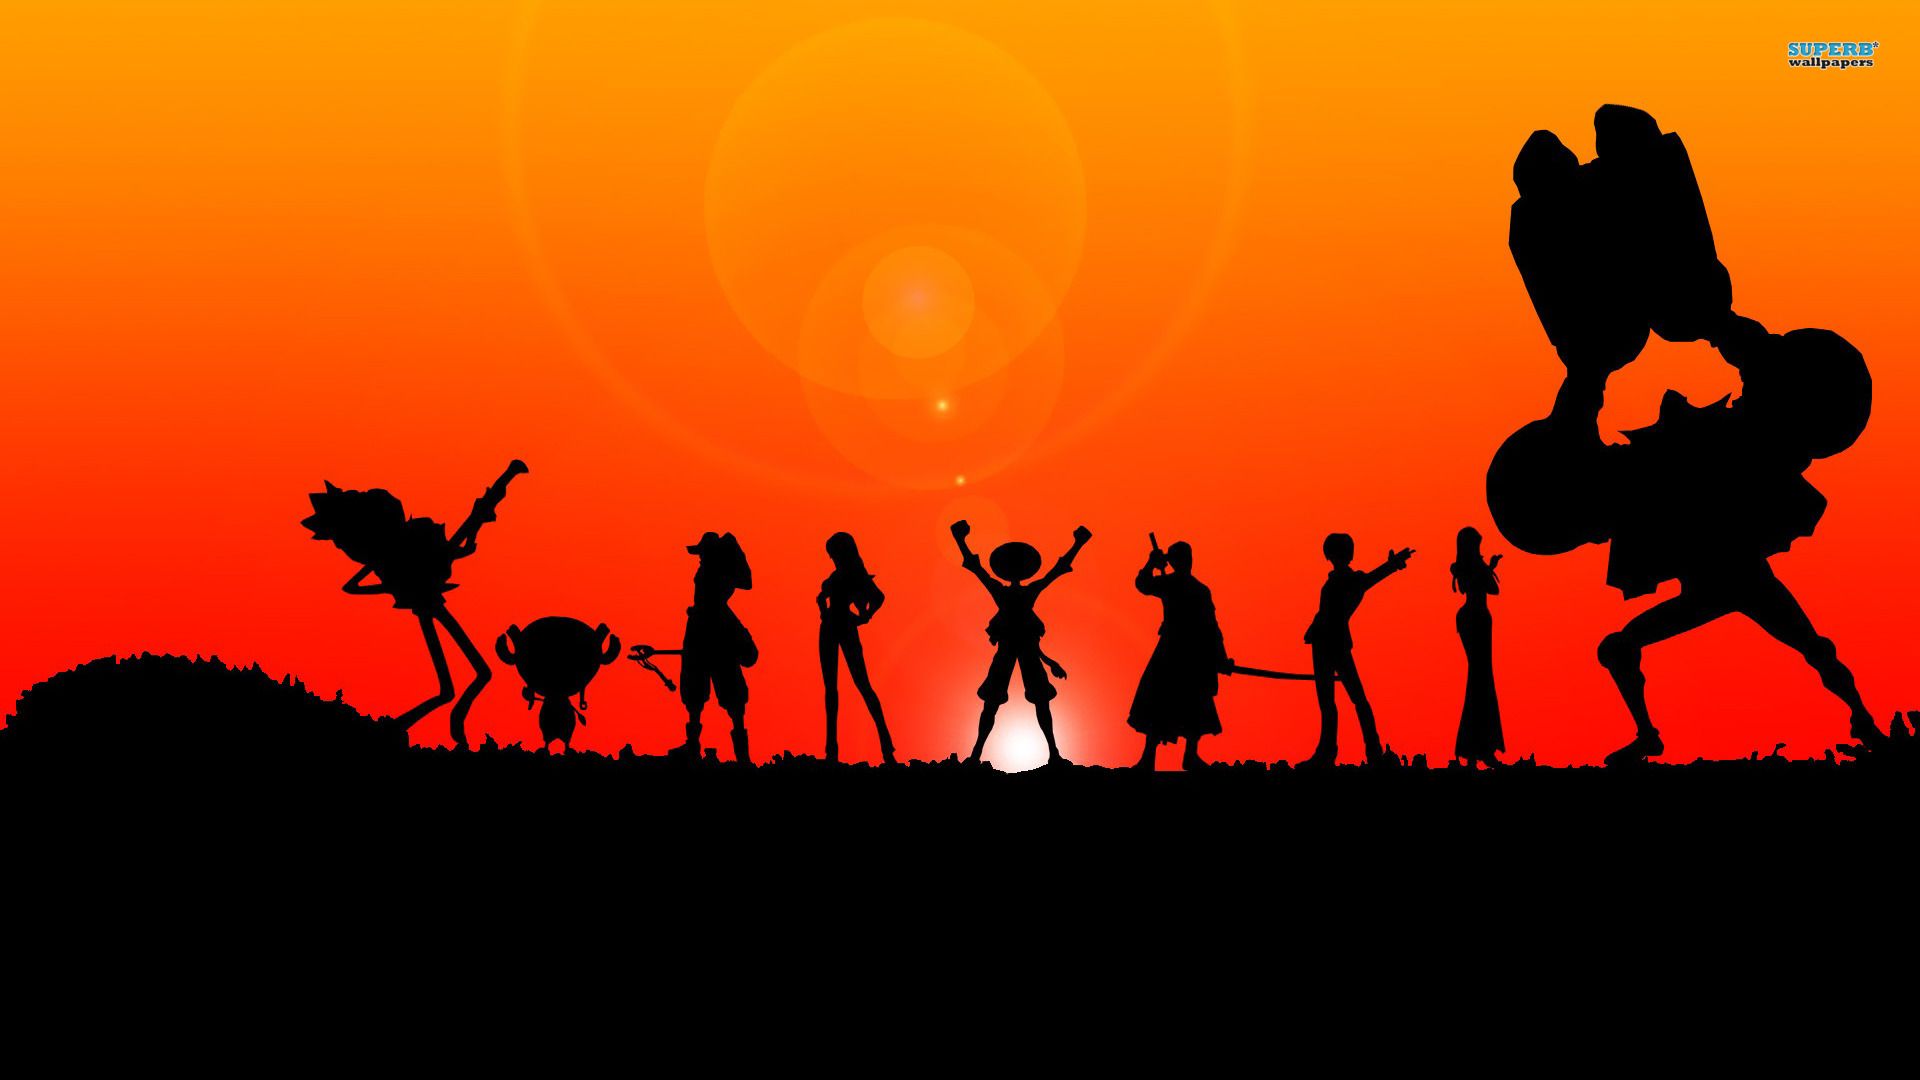 One Piece wallpaper   Anime wallpapers 1920x1080